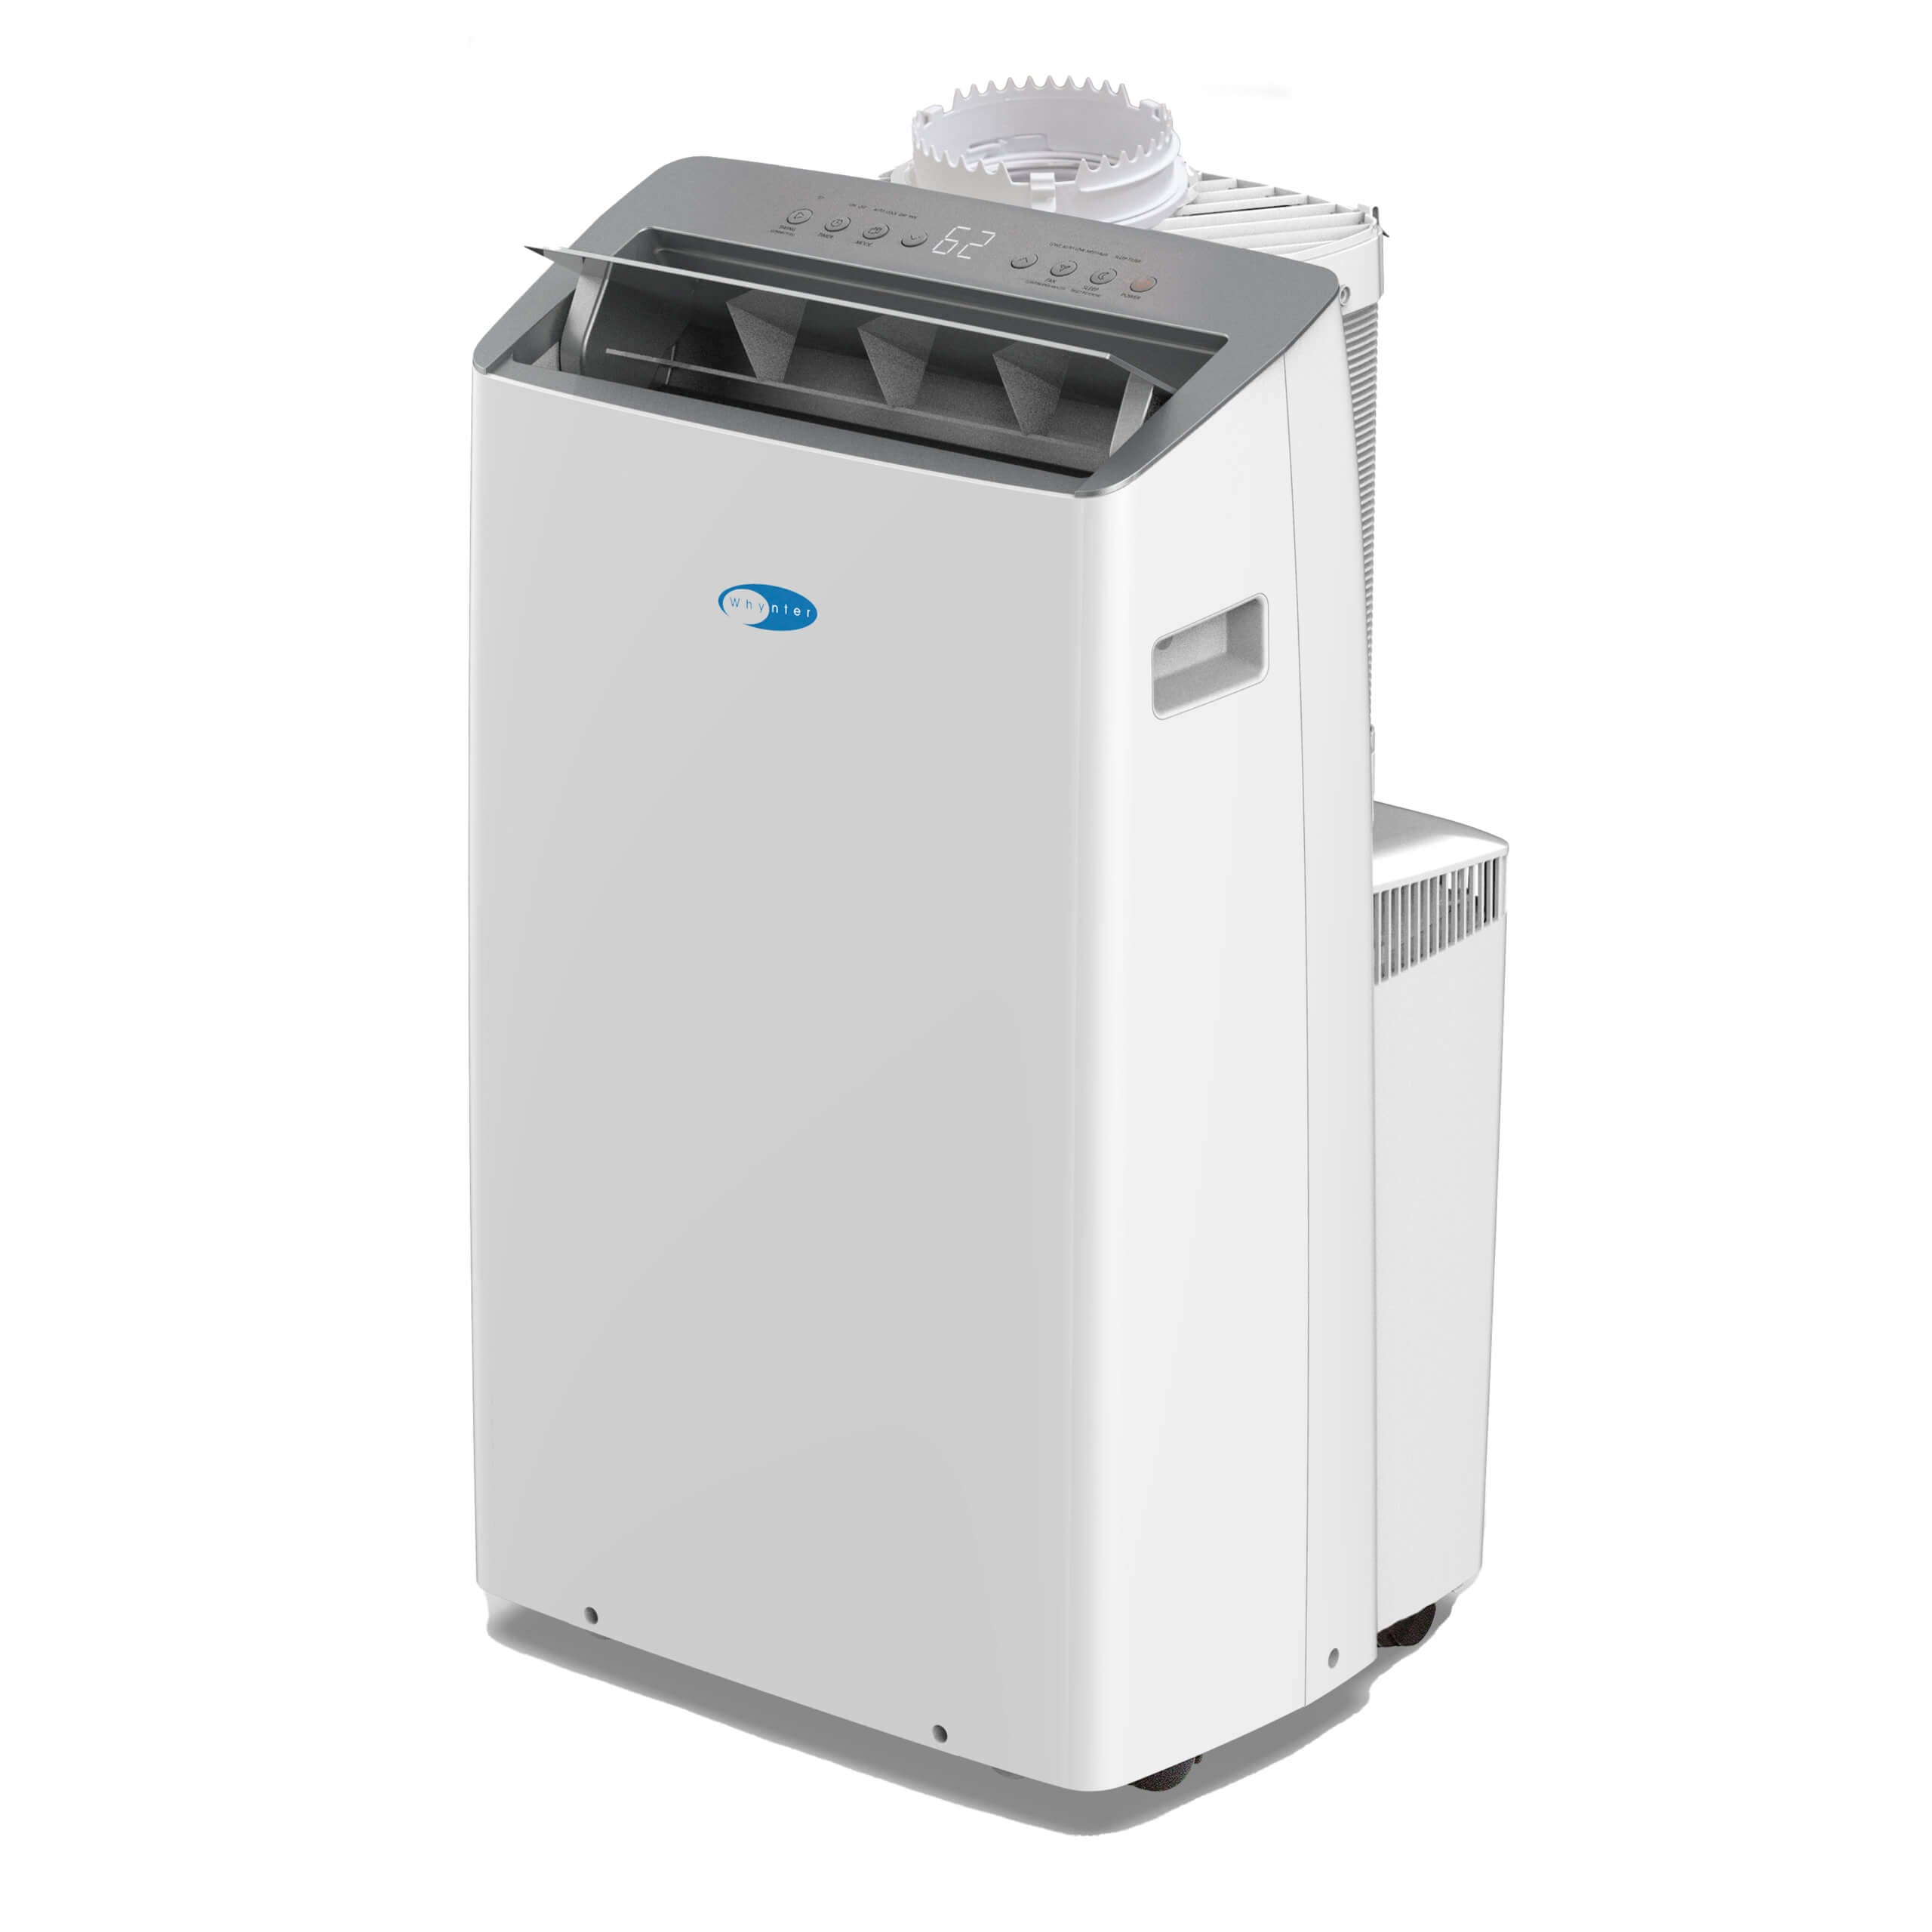 Whynter Whynter ARC-1030WN 12,000 BTU (10,000 BTU SACC) NEX Inverter Dual Hose Cooling Portable Air Conditioner, Dehumidifier, and Fan with Smart Wi-Fi, up to 500 sq ft in White